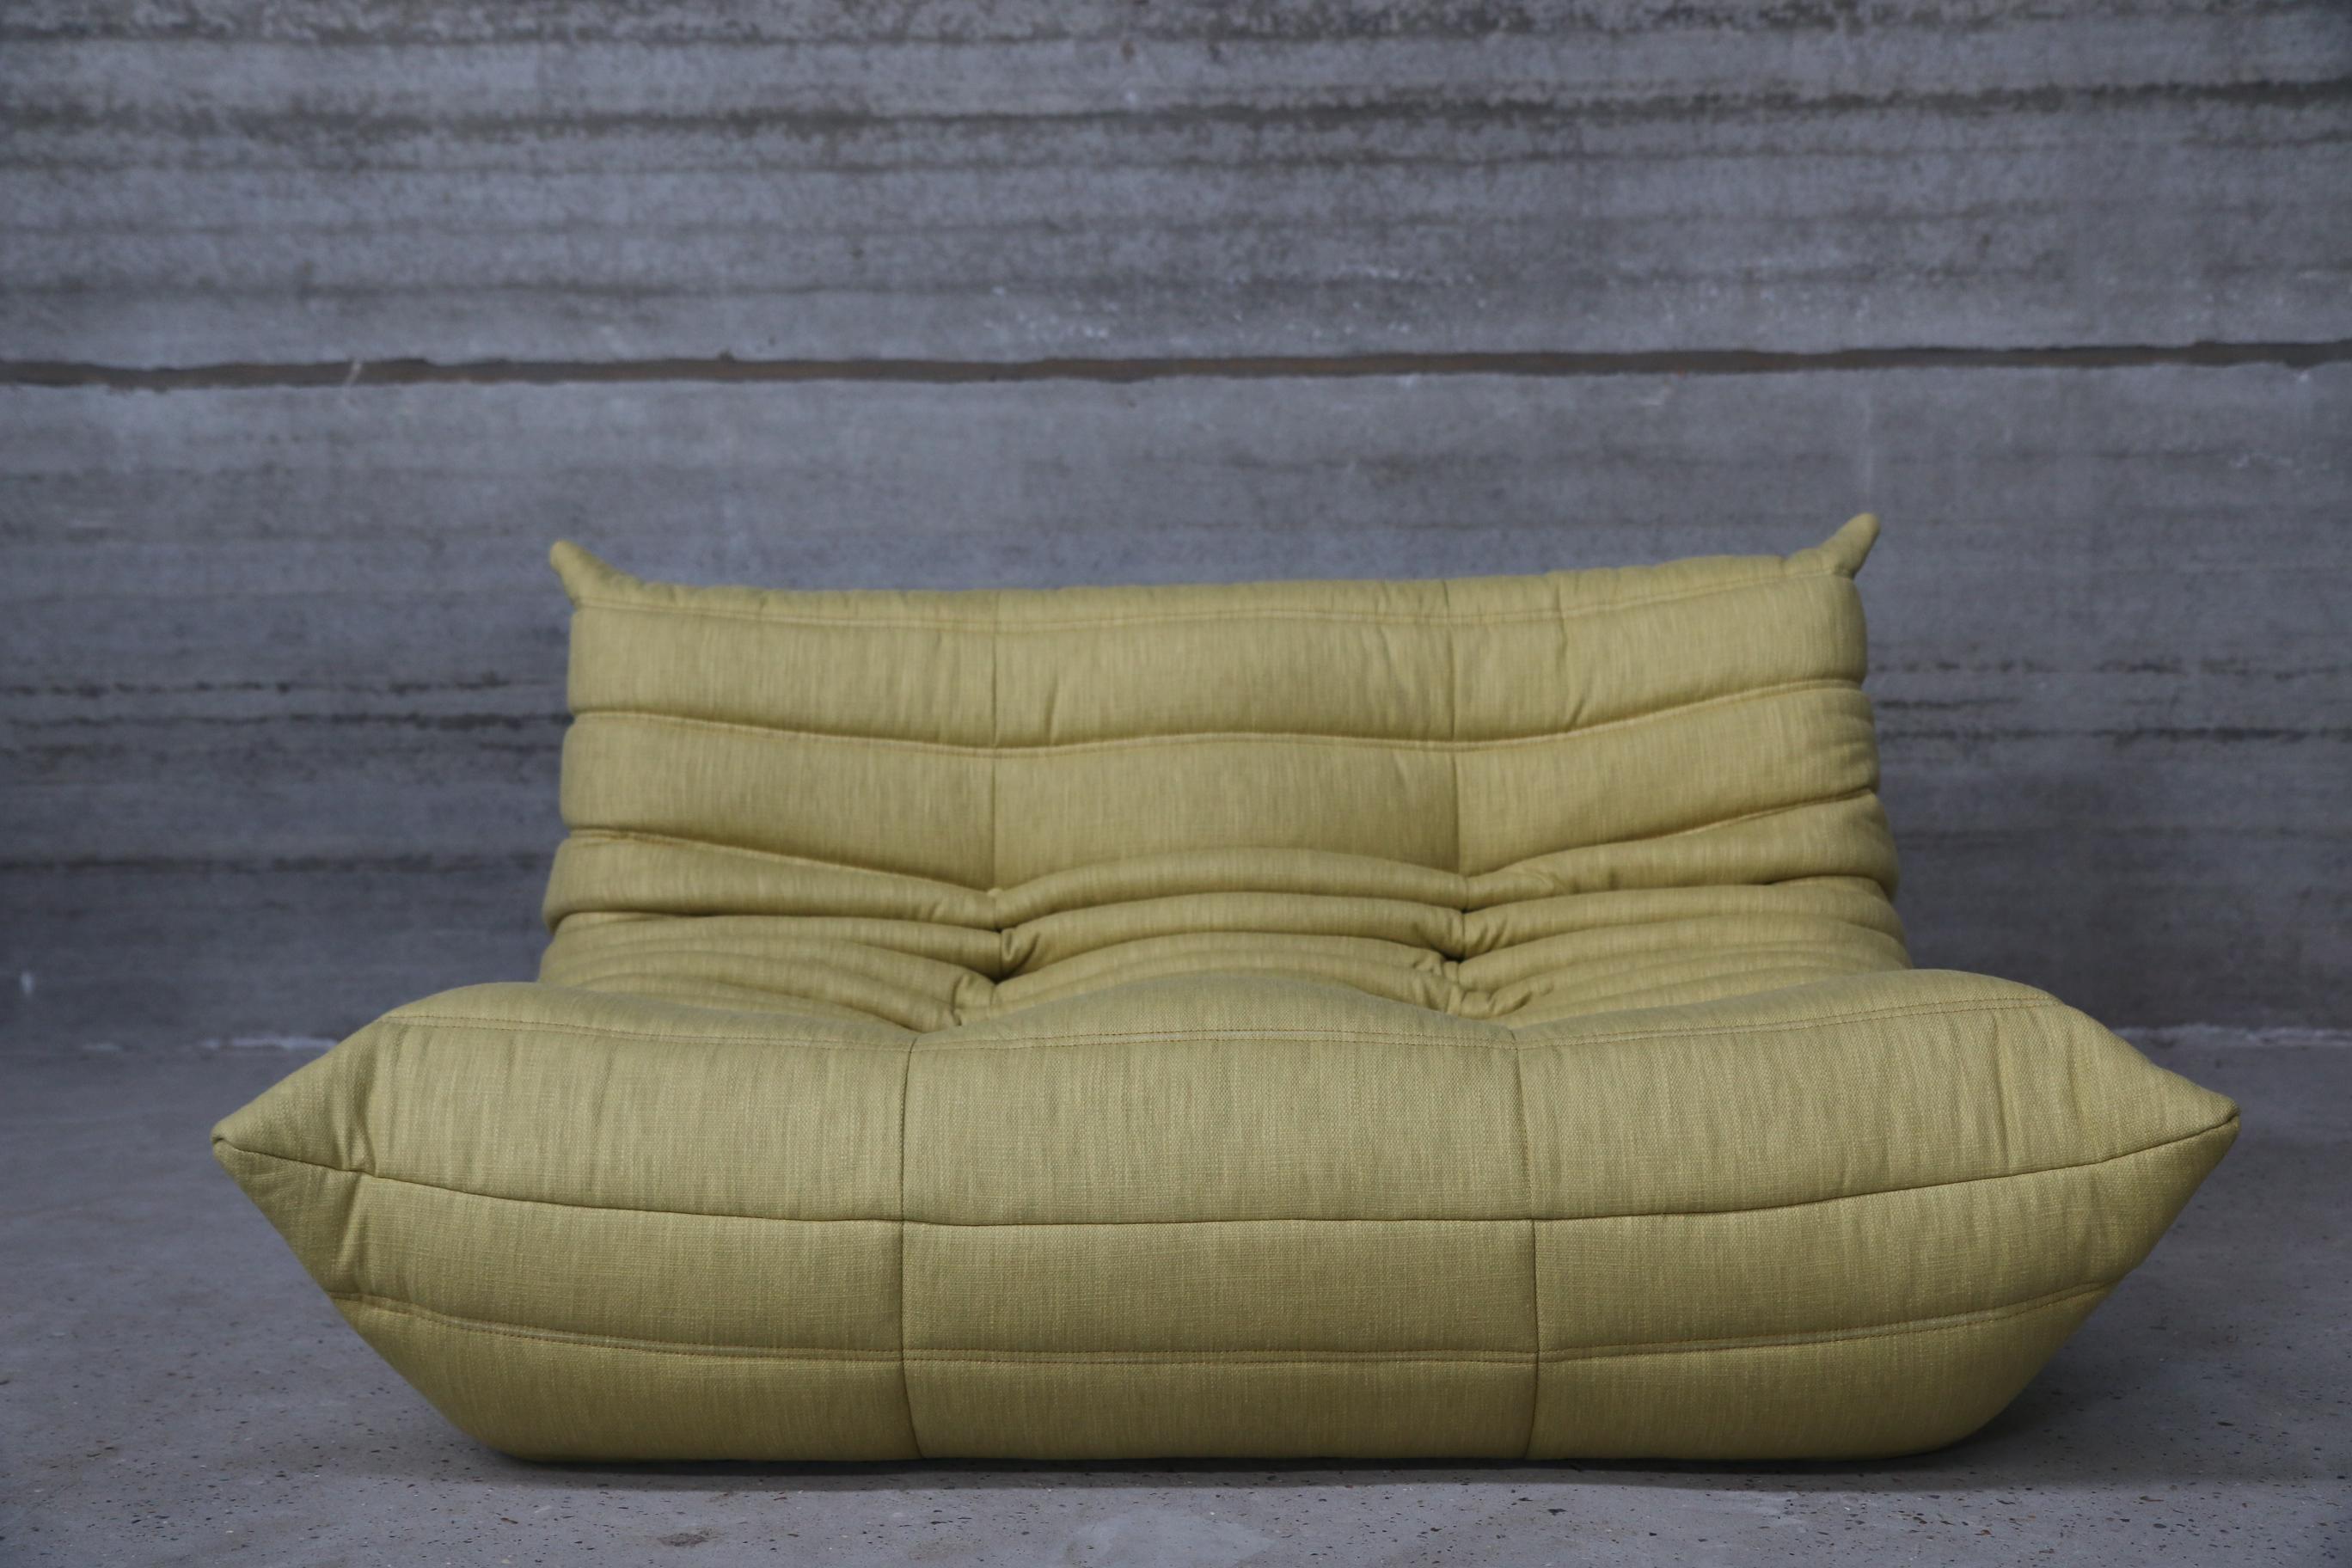 Iconic French vintage Loveseat, beautifully reupholstered in our brand new, stain free, washable and very durable Cordoba Chartreuse fabric.
Original genuine vintage 